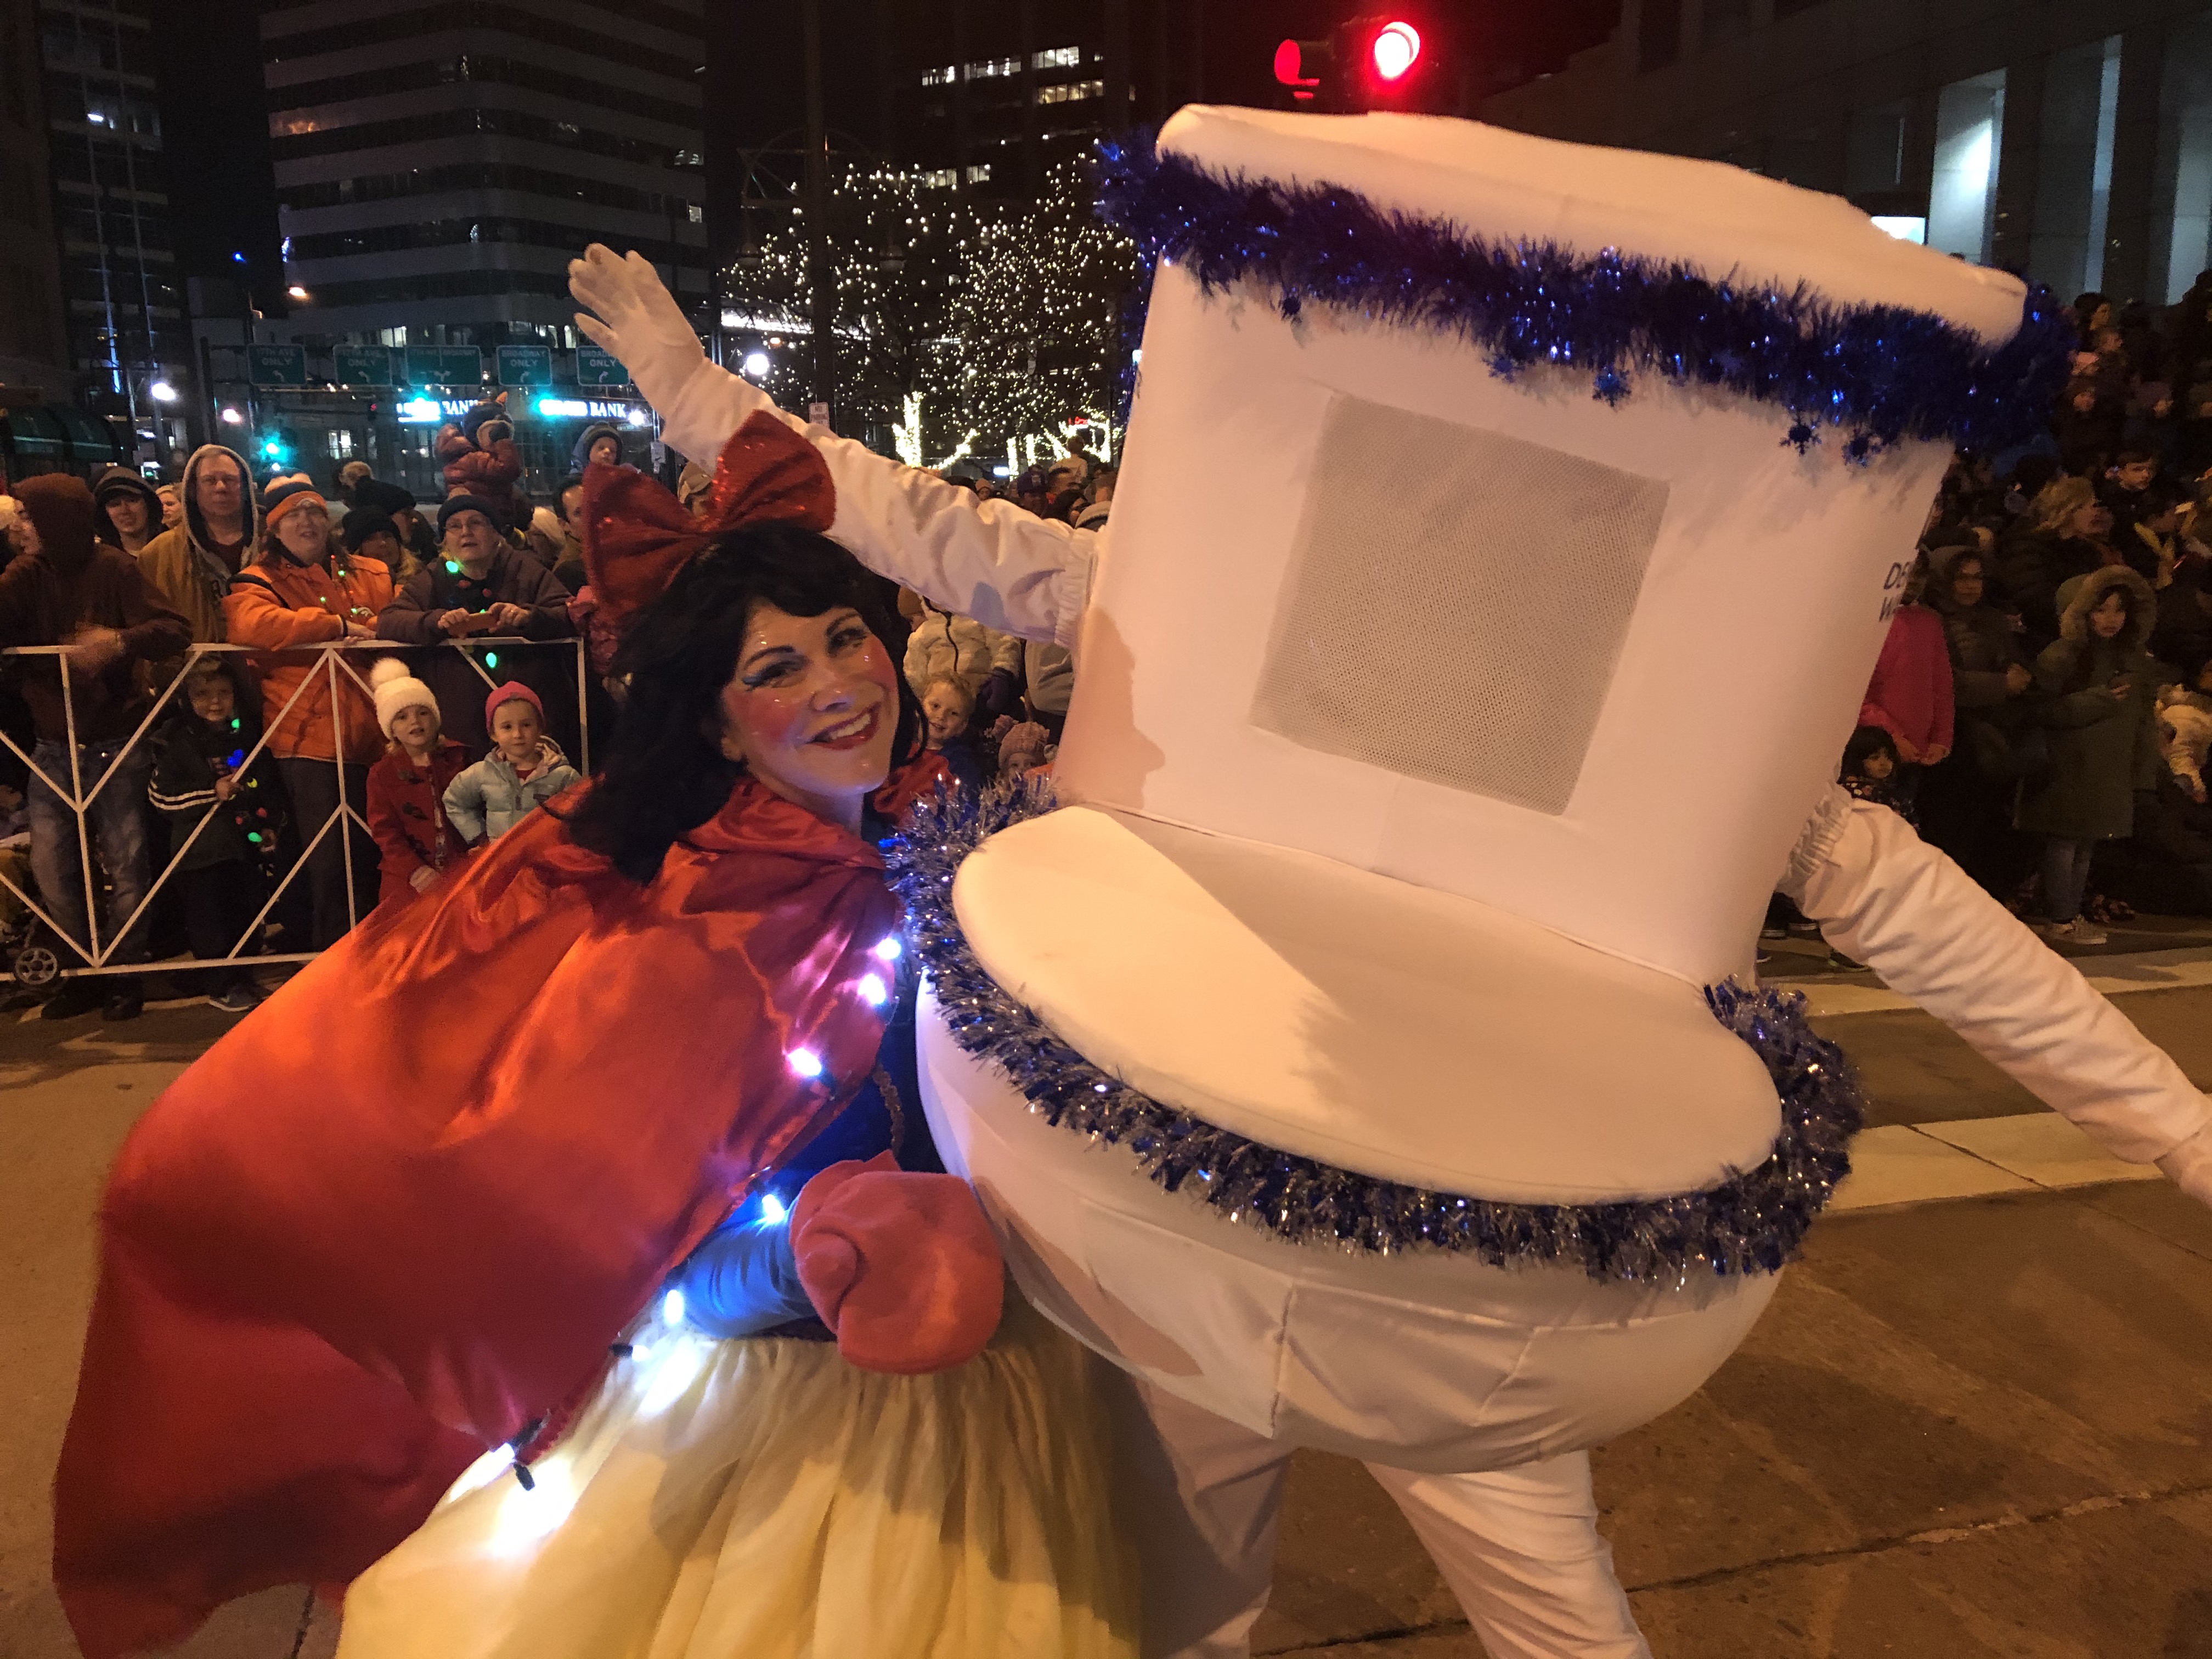 A man in a toilet costume stands next to a smiling woman in a Snow White costume.